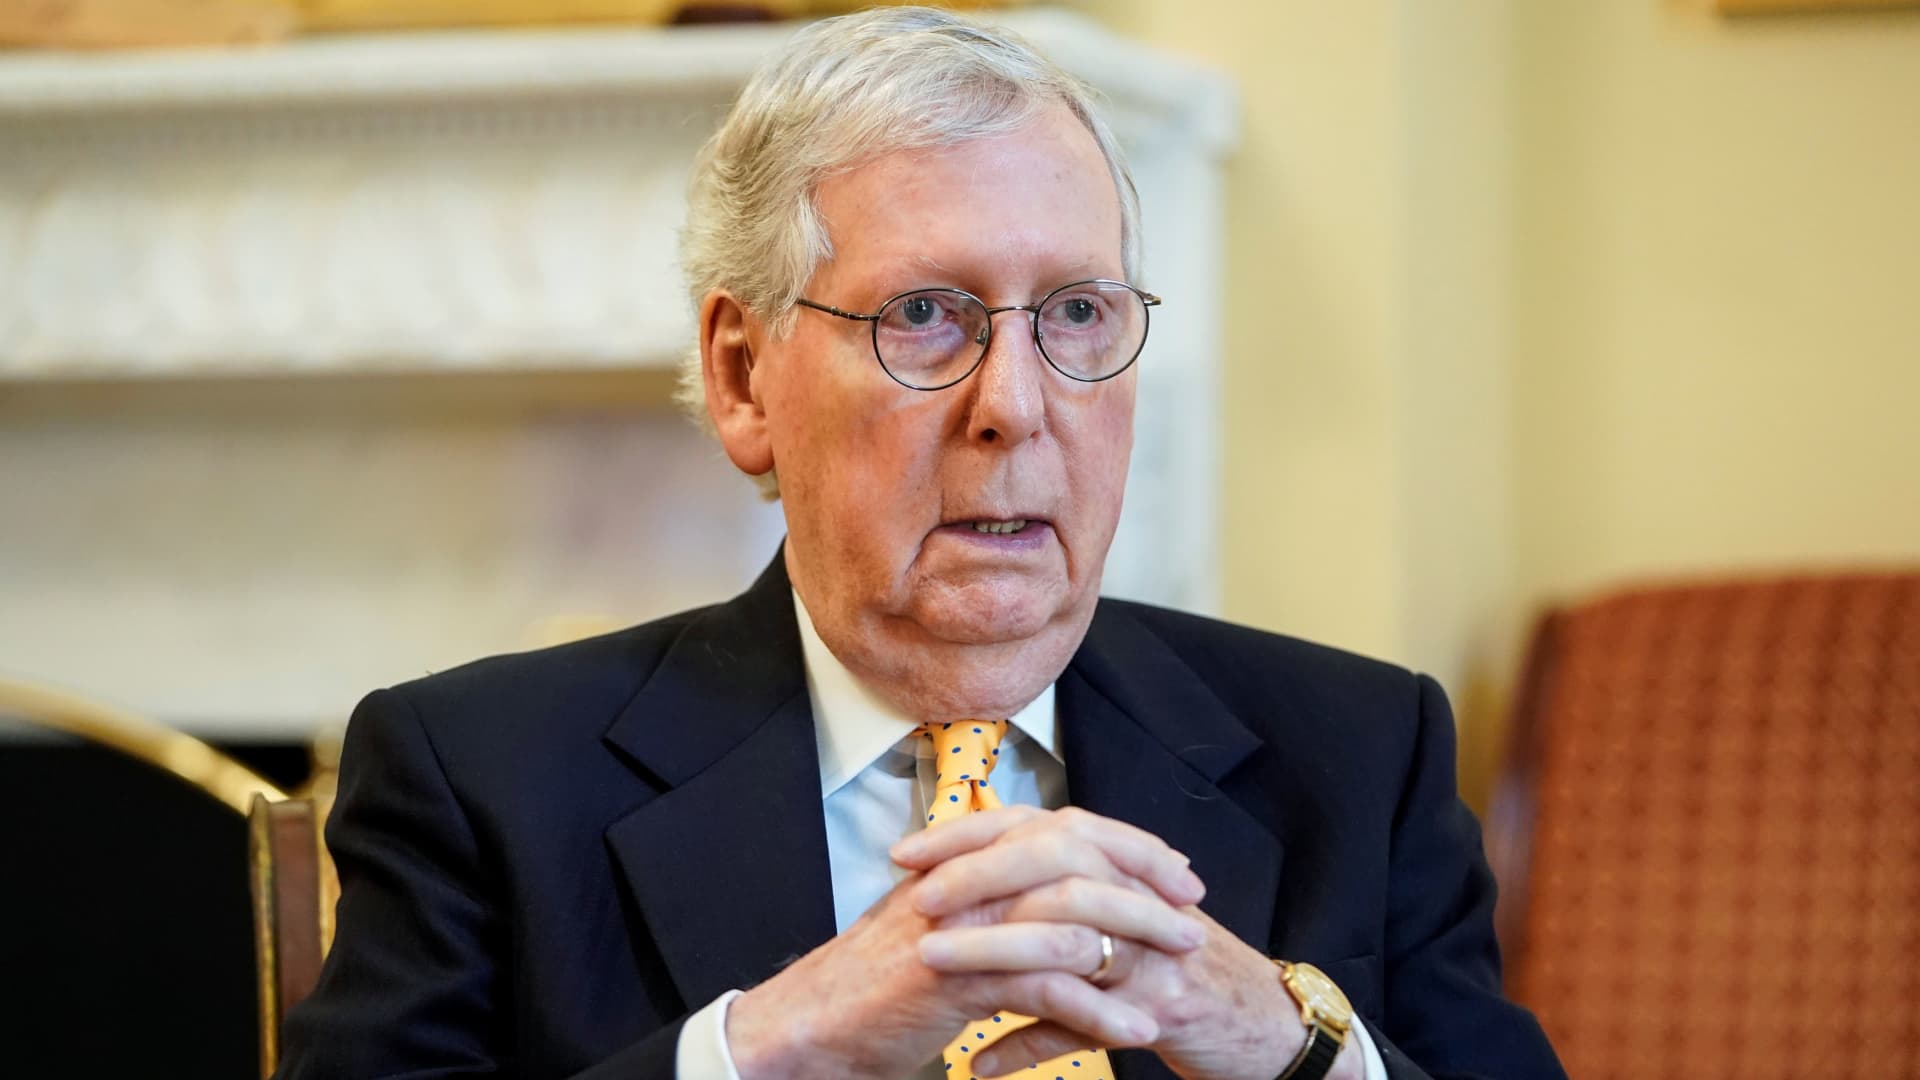 Senate Minority Leader Mitch McConnell (R-KY) speaks during an interview with Reuters on Capitol Hill in Washington, U.S., July 27, 2021.